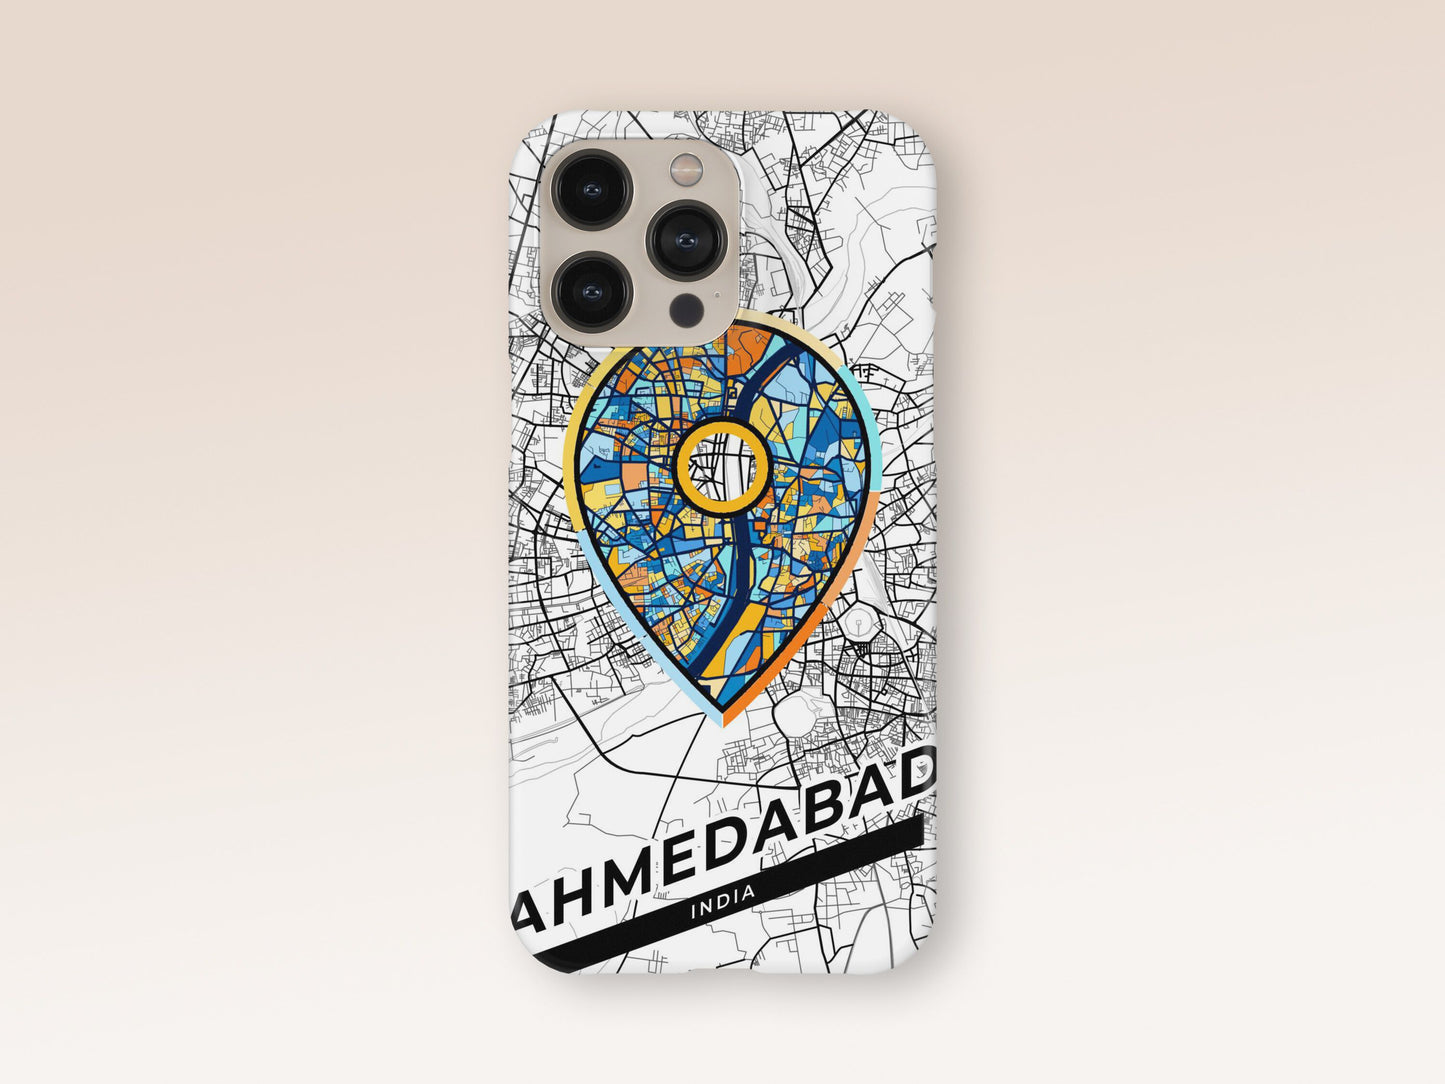 Ahmedabad India slim phone case with colorful icon. Birthday, wedding or housewarming gift. Couple match cases. 1